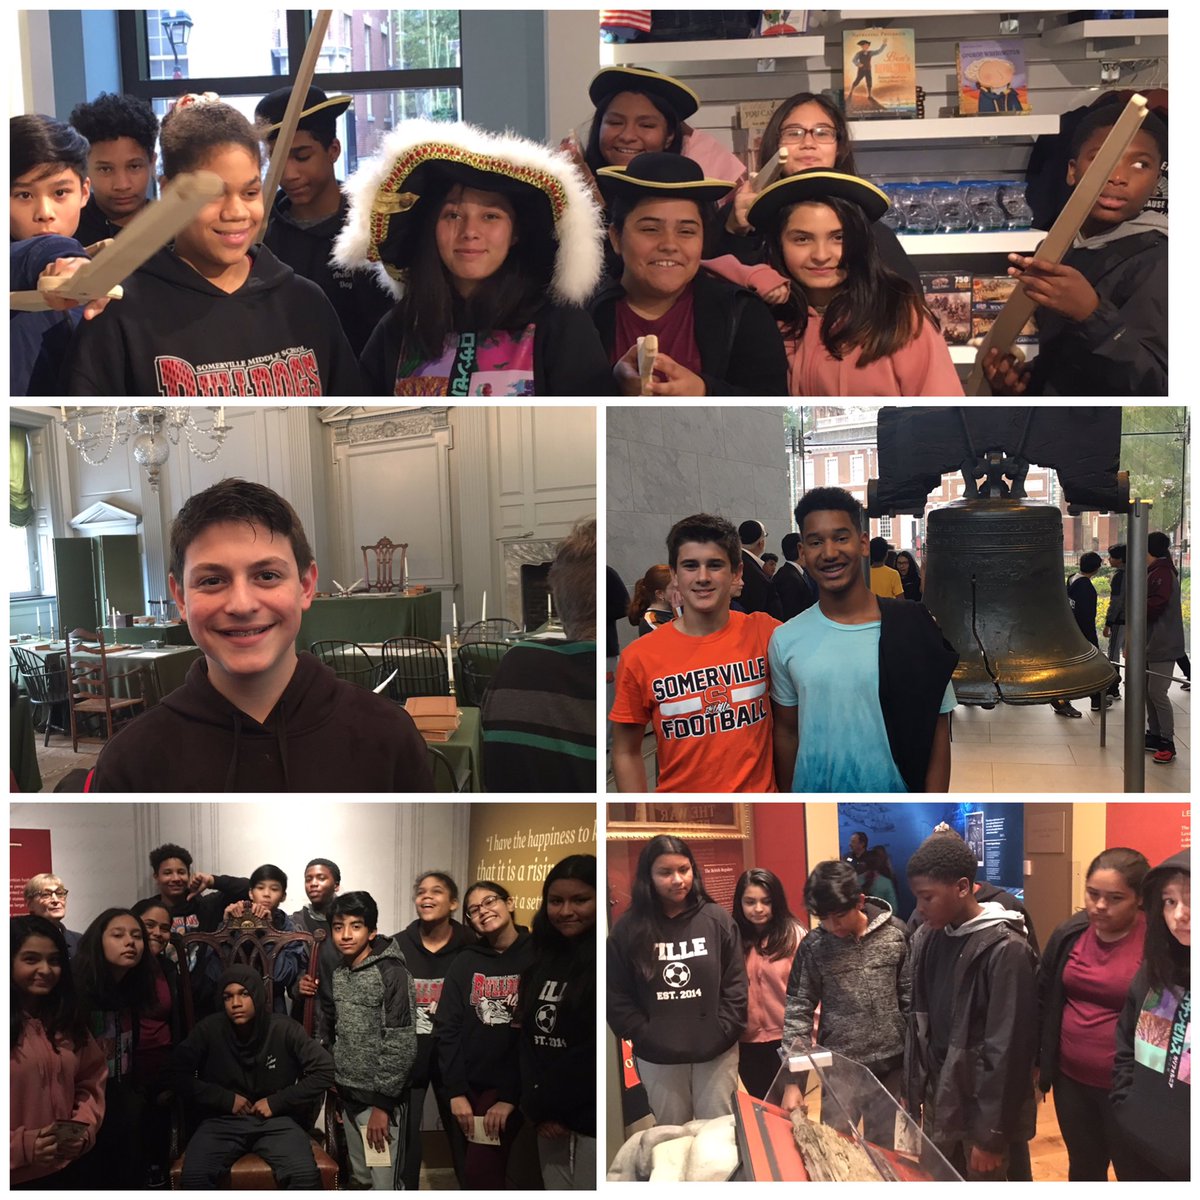 Great trip to historic #philadelphia @AmRevMuseum #libertybell #independencehall #allin4theville